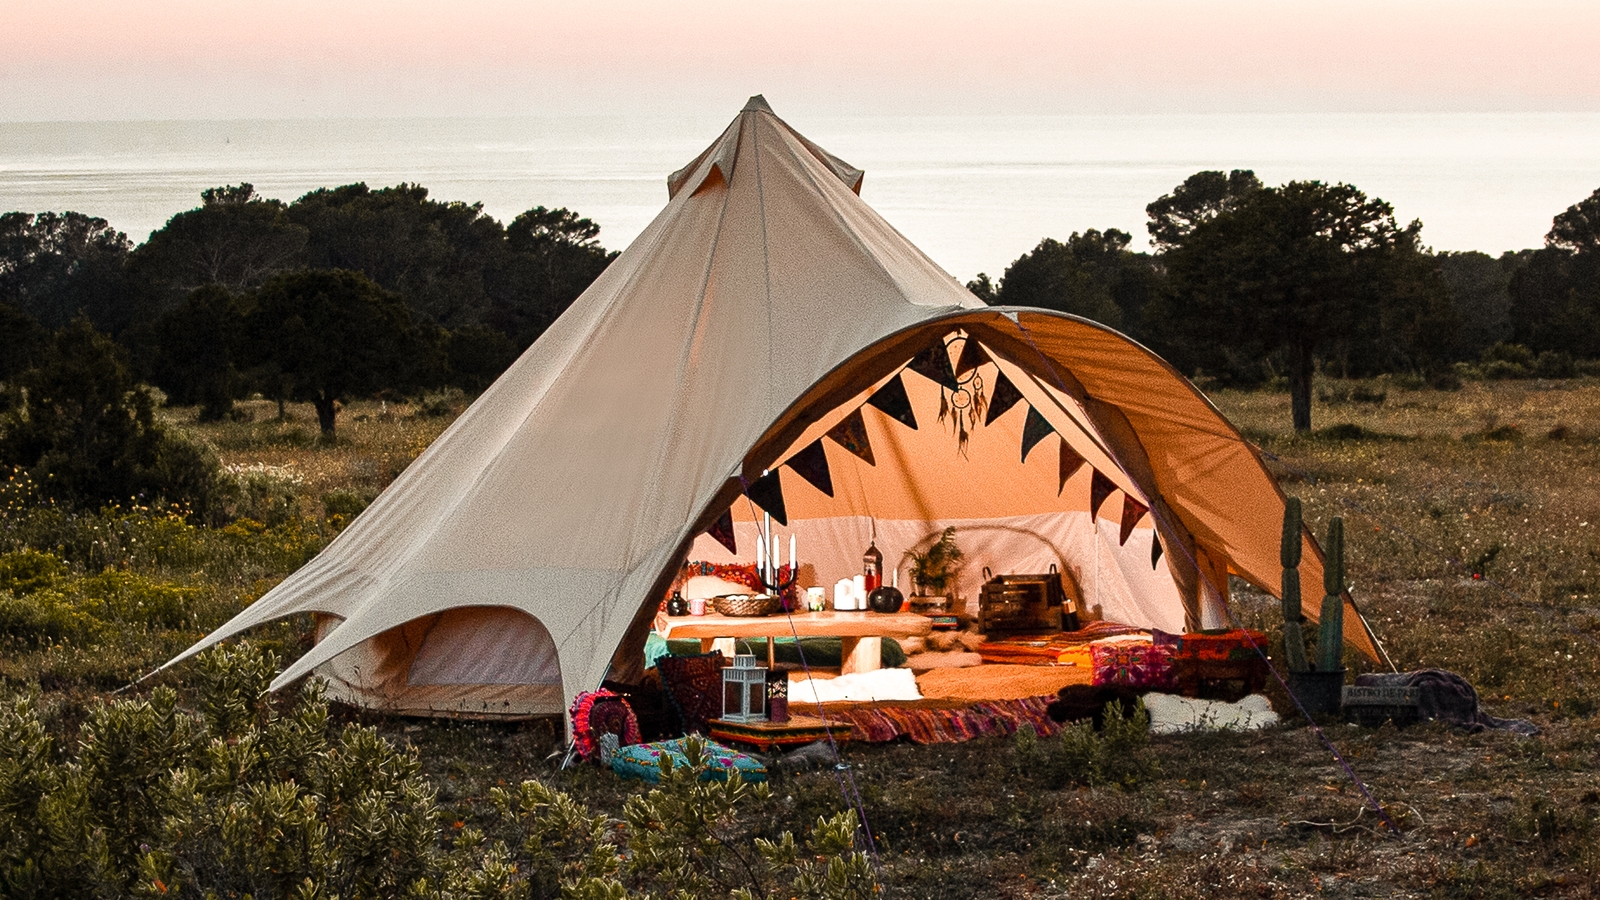 How to host a tent on Airbnb - Resource Airbnb